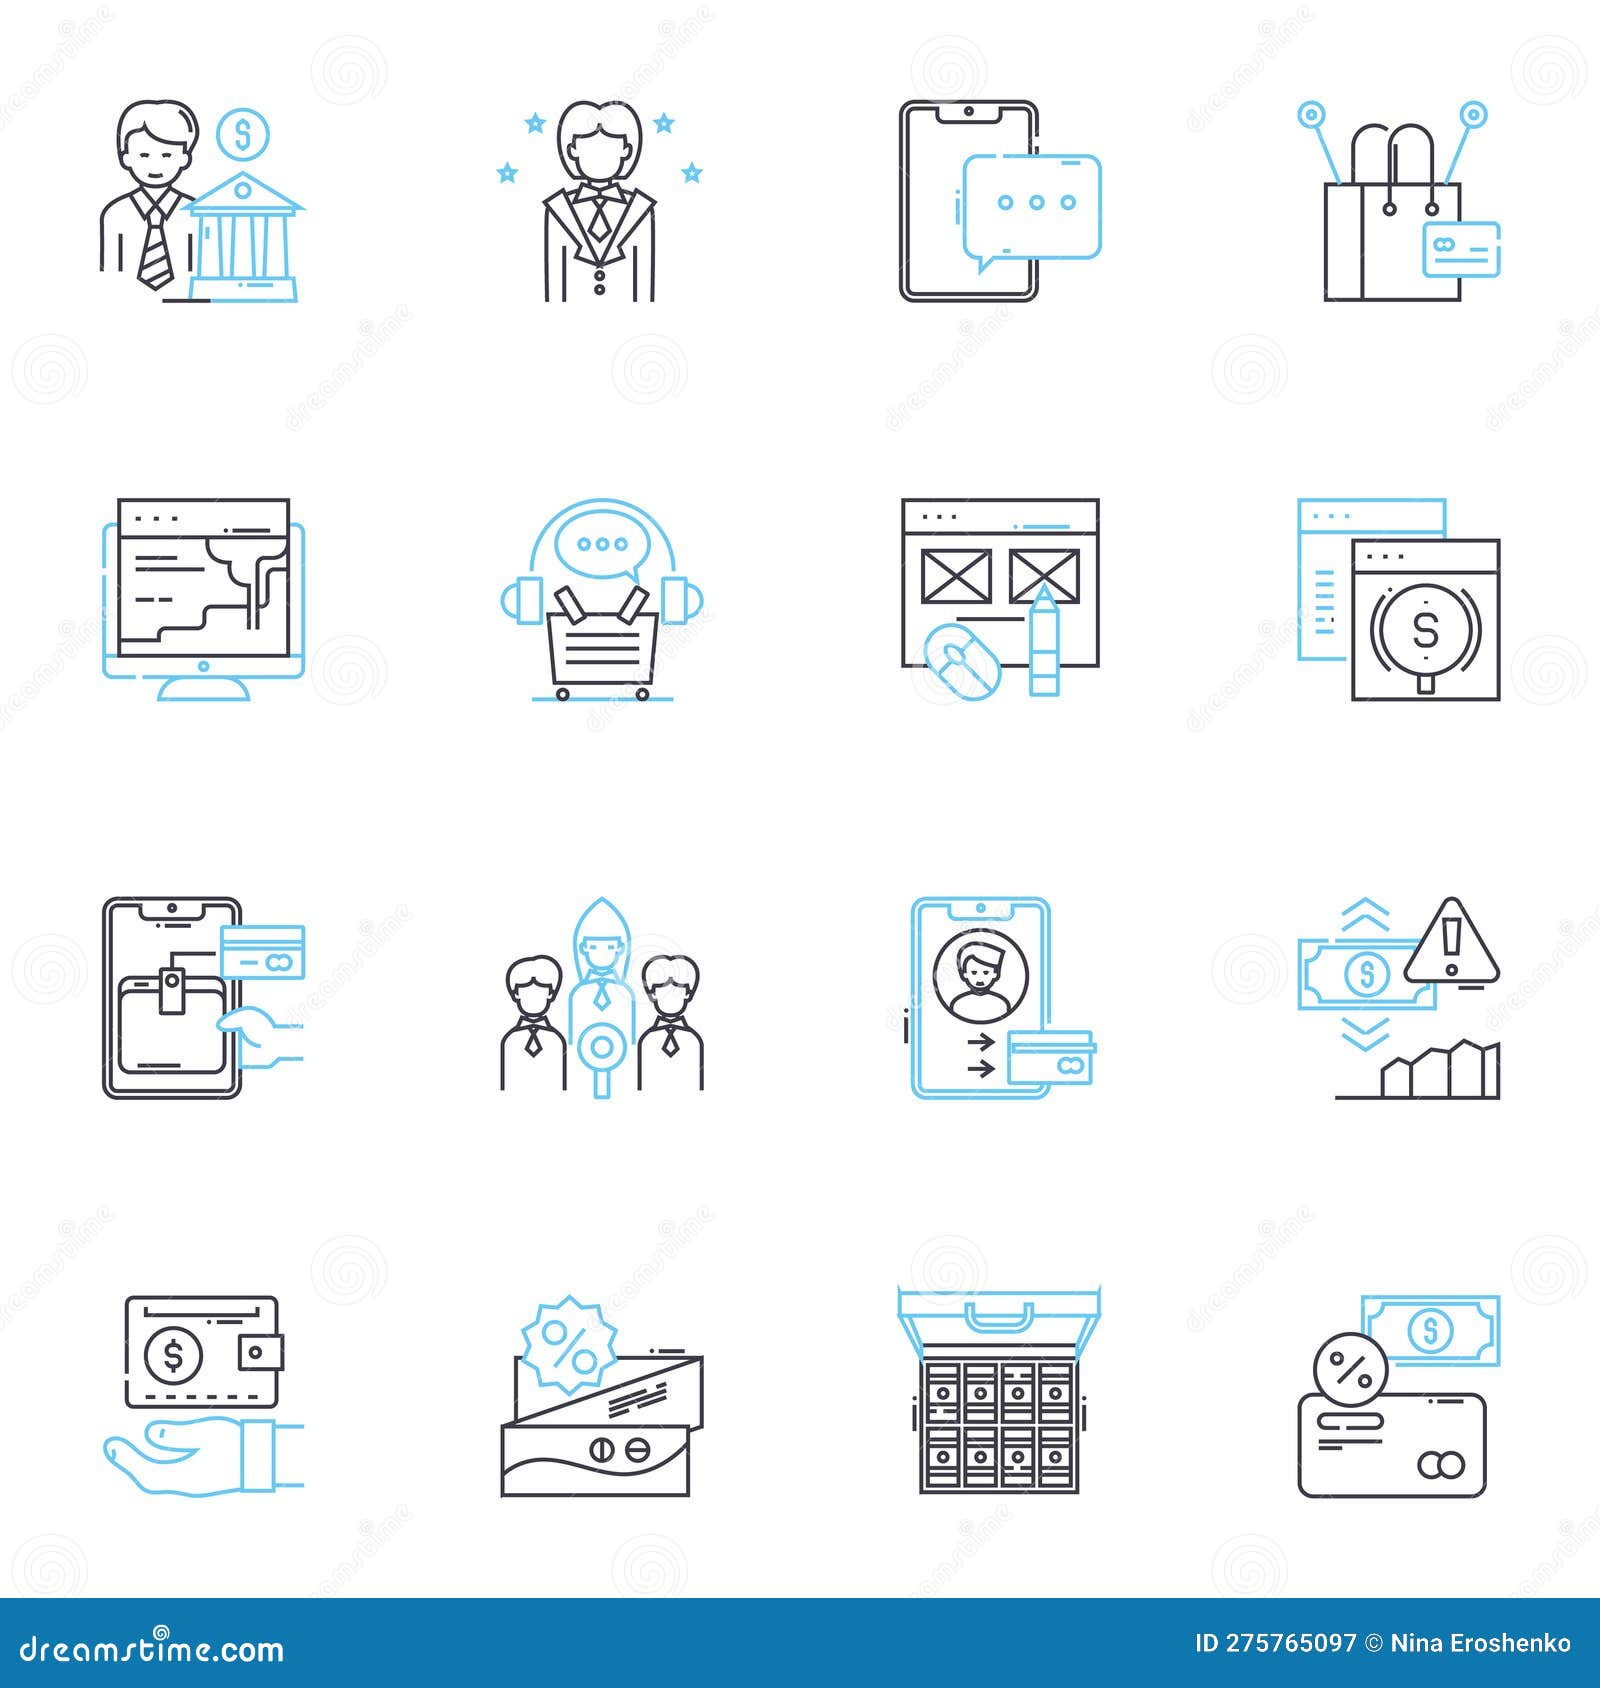 cyber economy linear icons set. digital, blockchain, cryptocurrency, e-commerce, cybersecurity, tech-based, automation